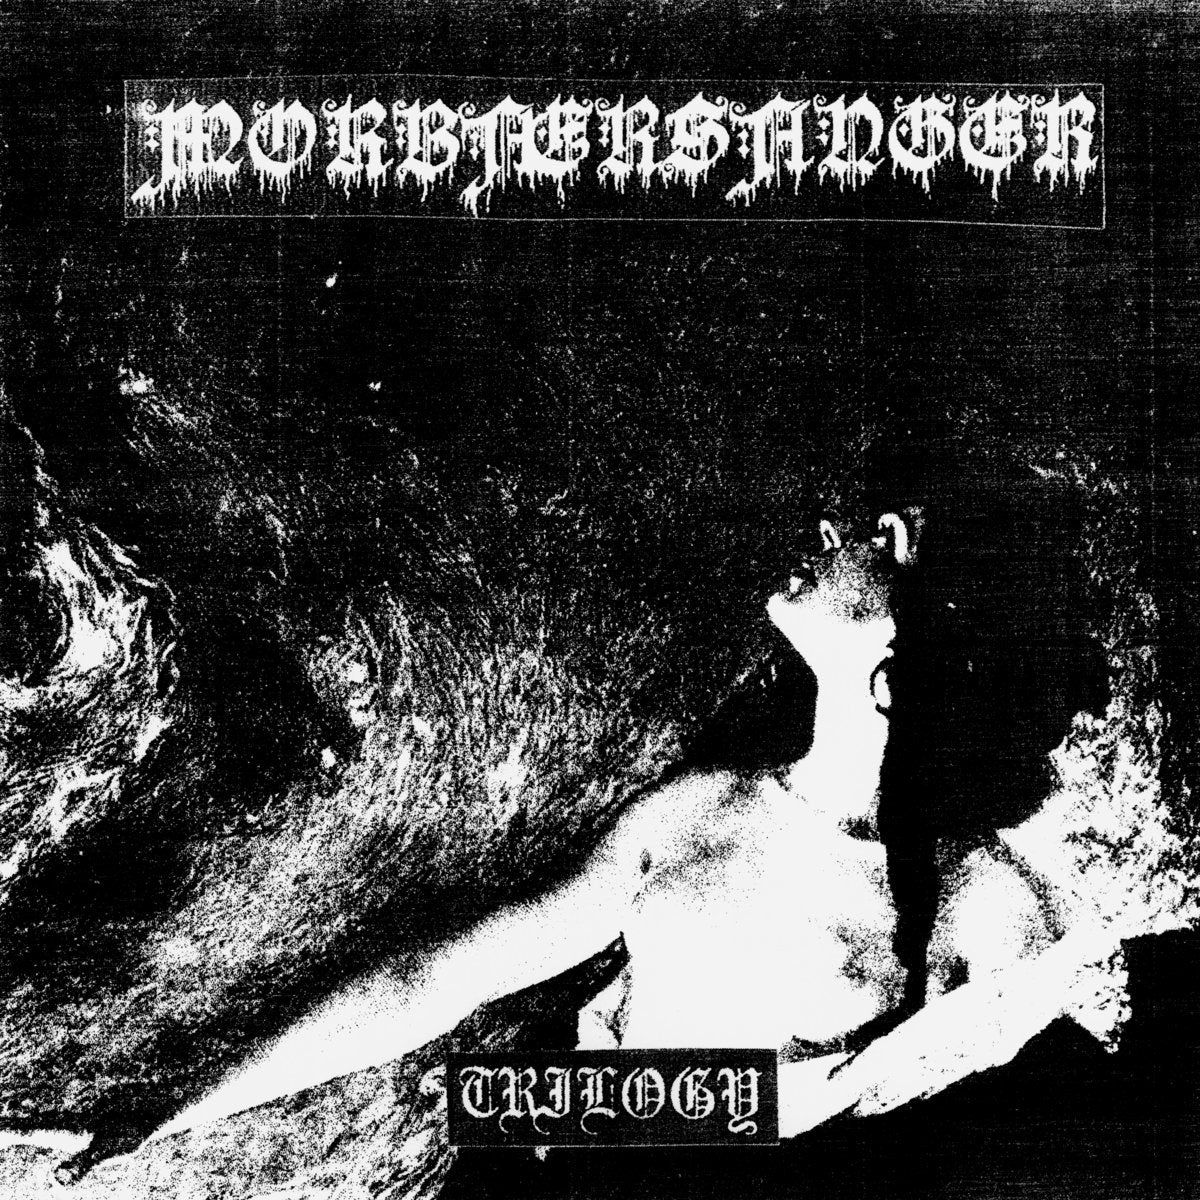 Morbærsanger - Trilogy [Dungeon Synth] (Self-Released - CD - 10/15/23)